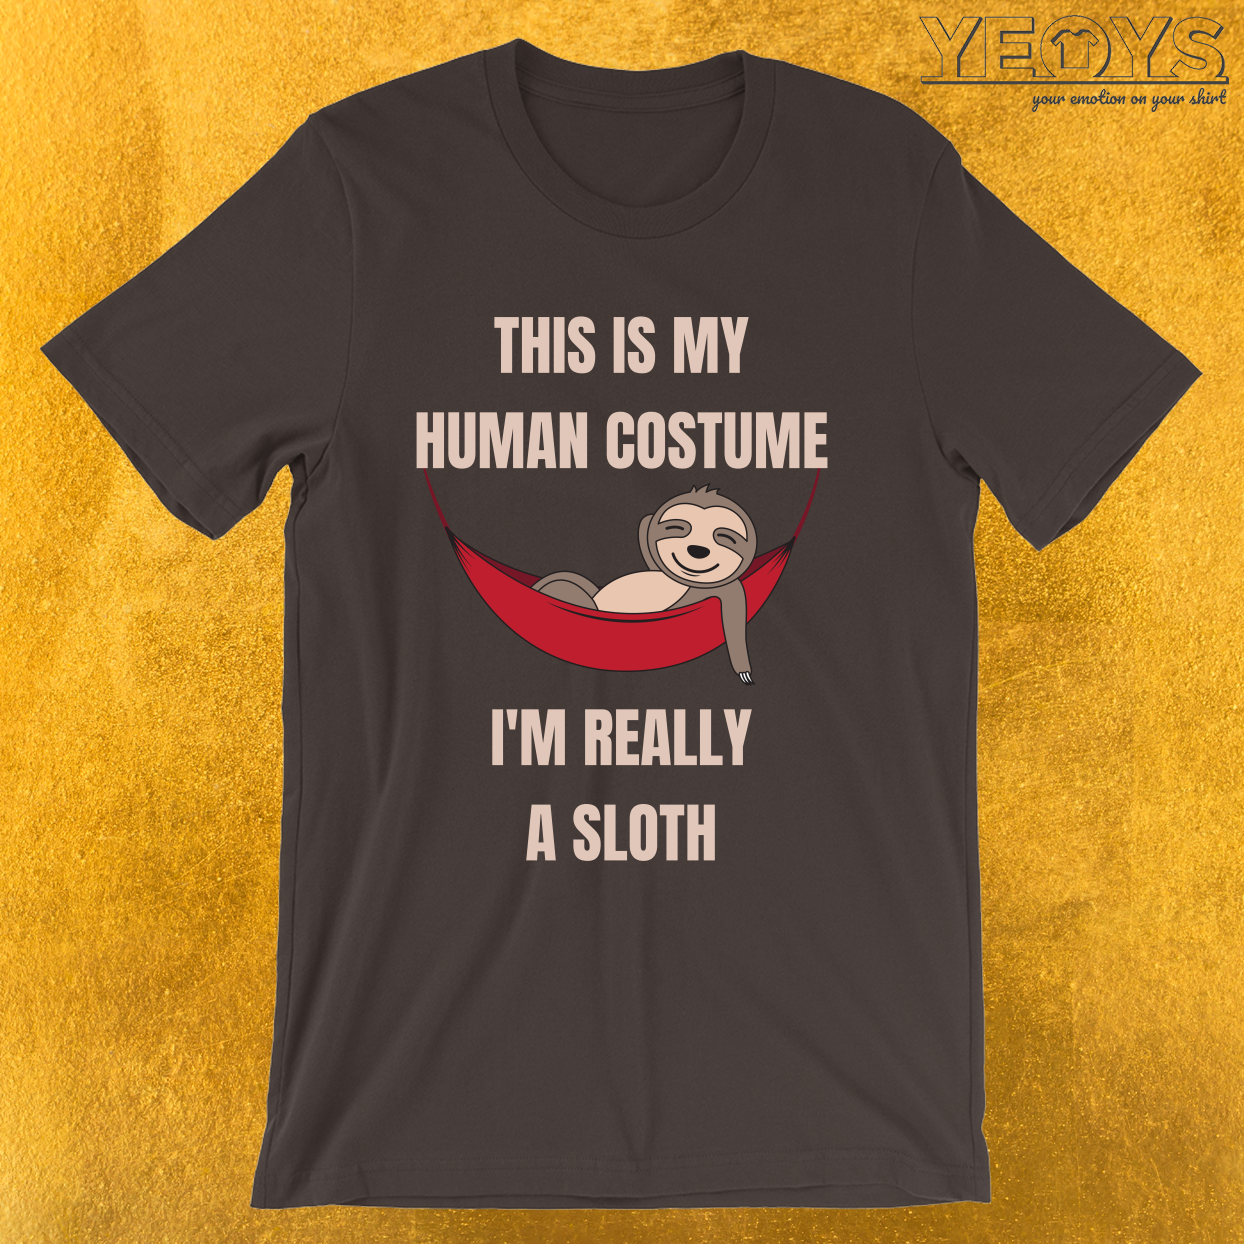 This is My Human Costume I’m Really a Sloth – Funny Sloth Costume Tee